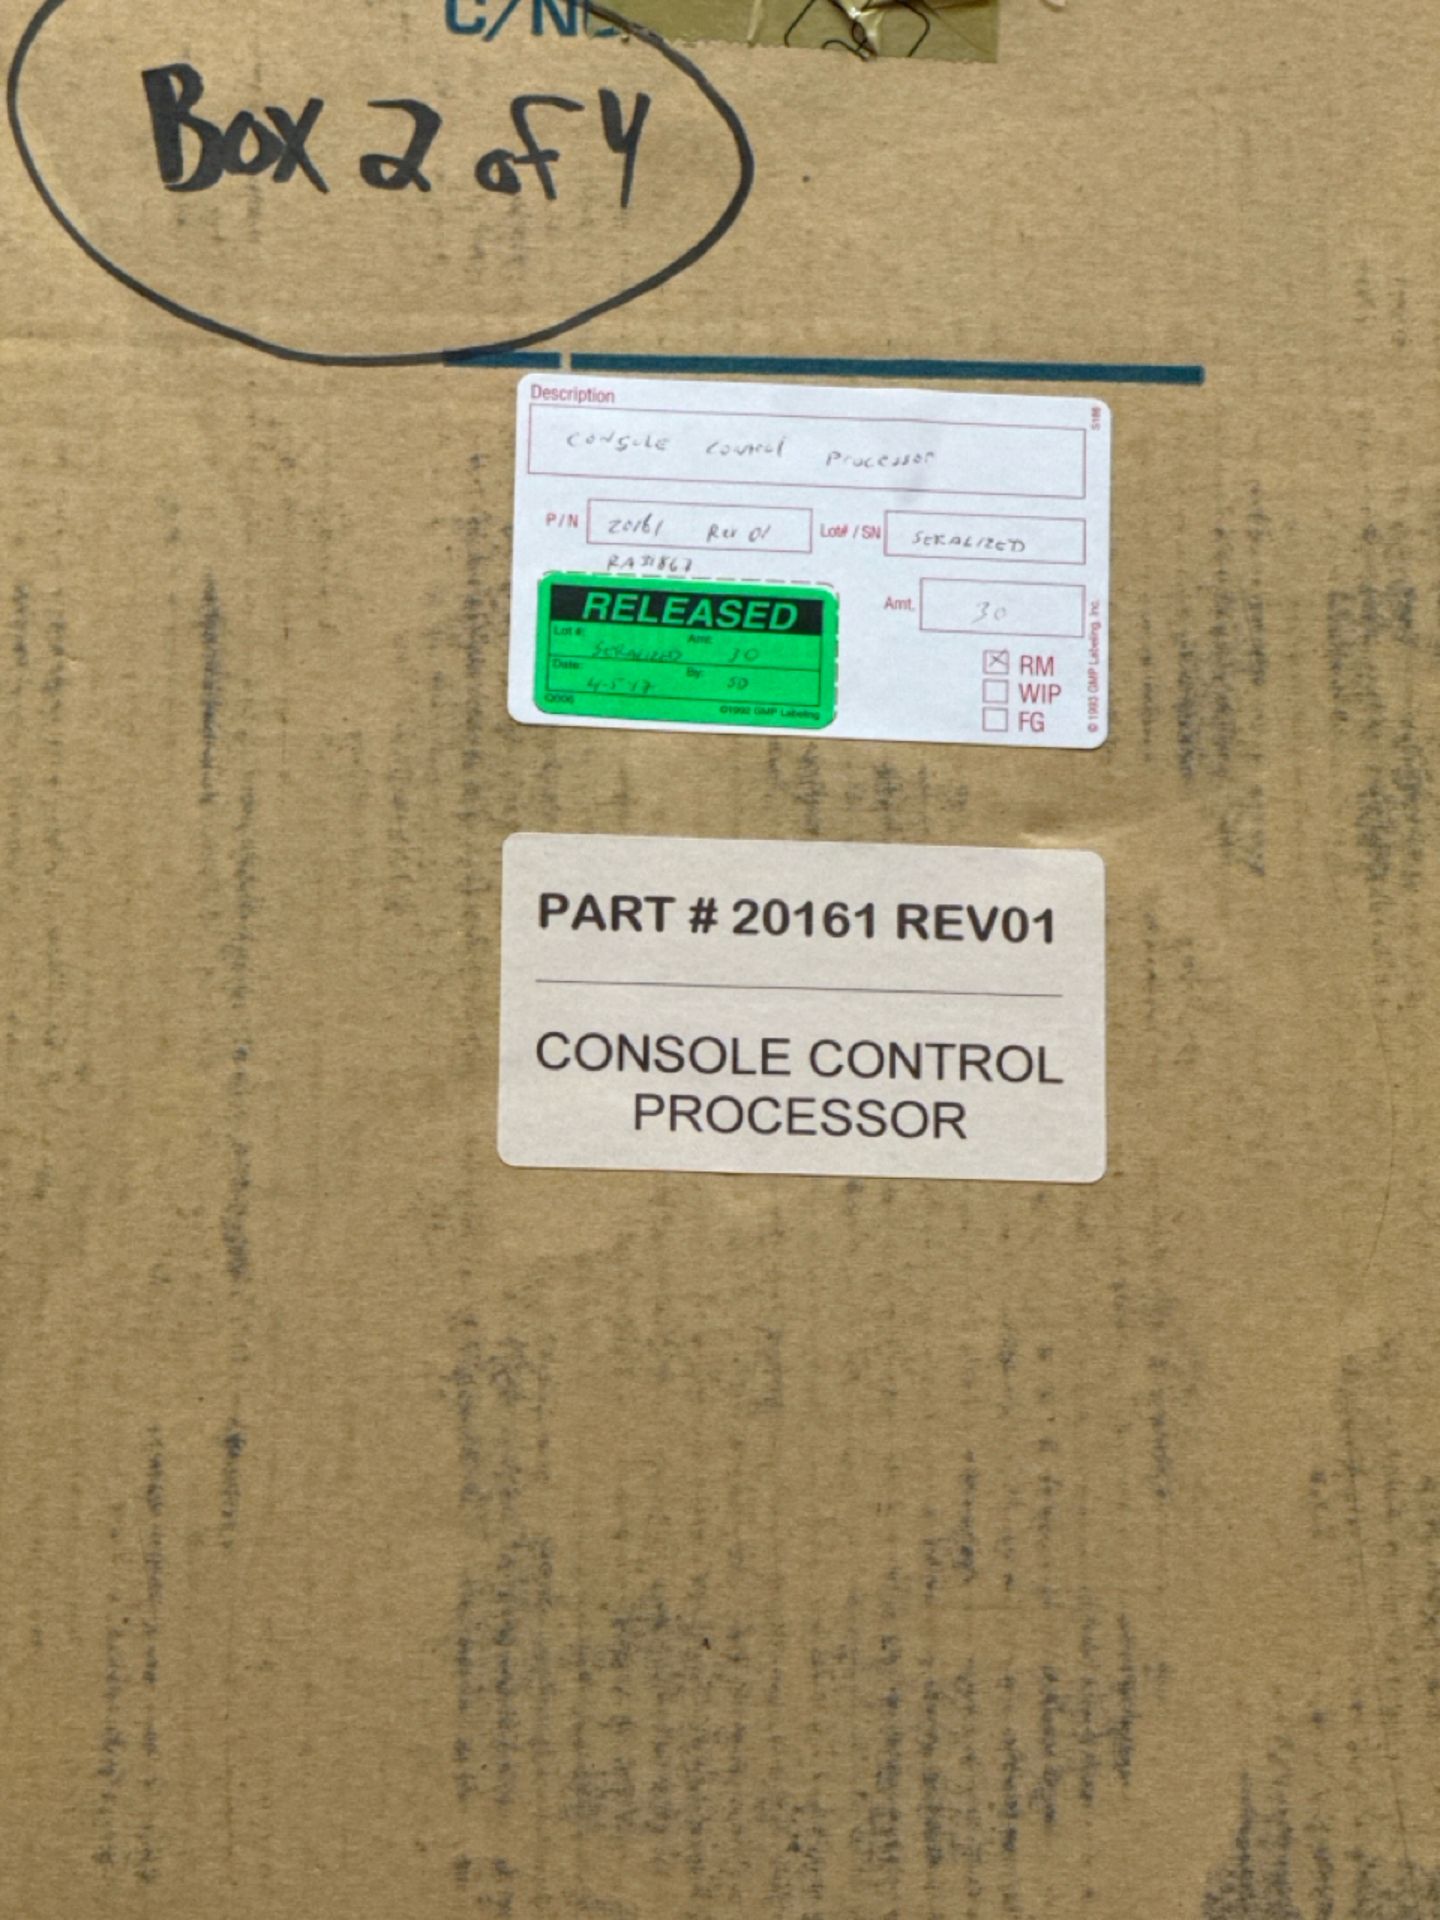 Contents of Center Pallet Racking - Image 15 of 68